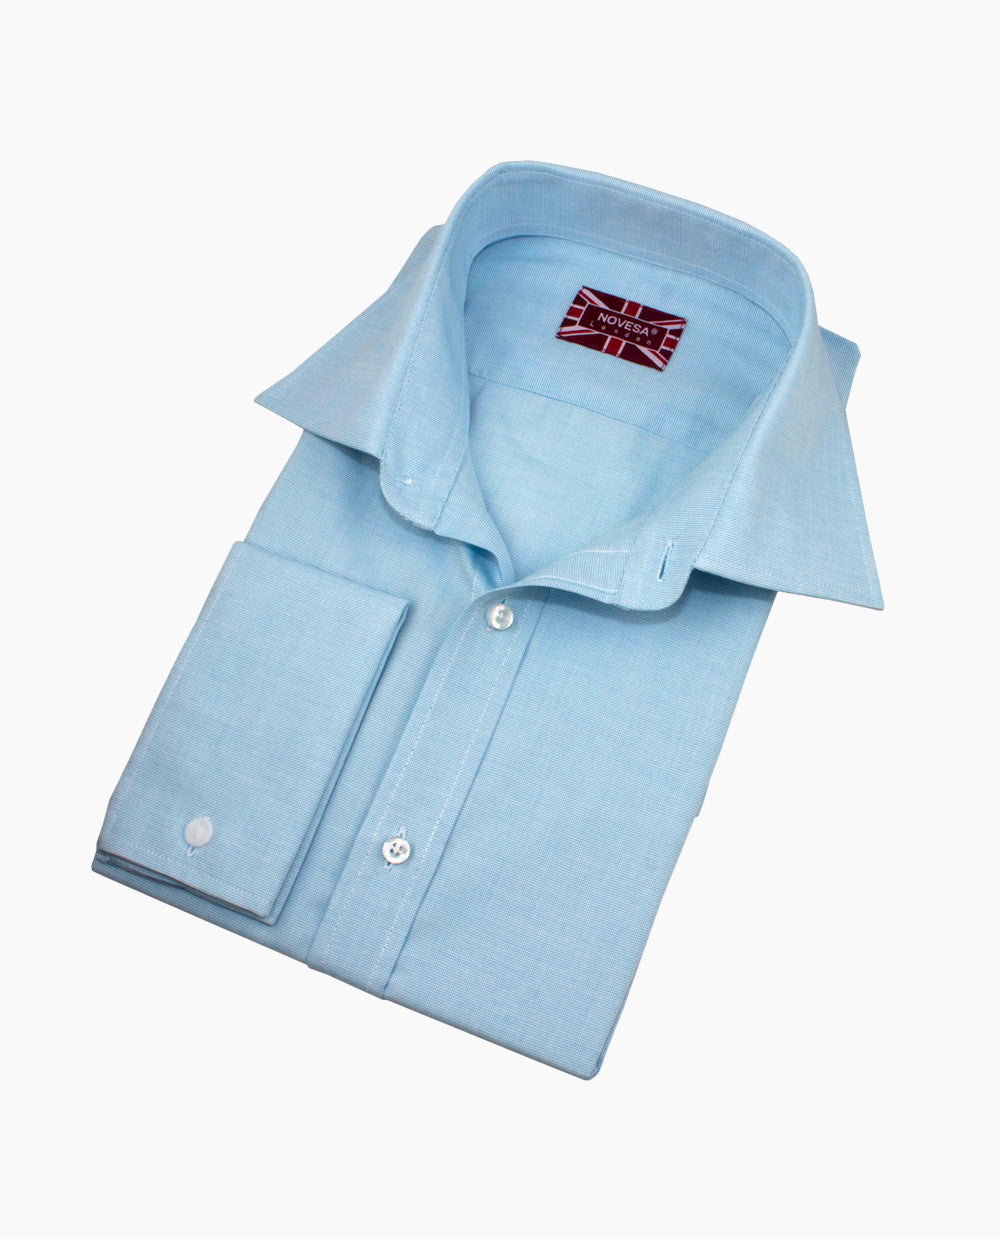 Turquoise Italian Pinpoint Oxford Shirt